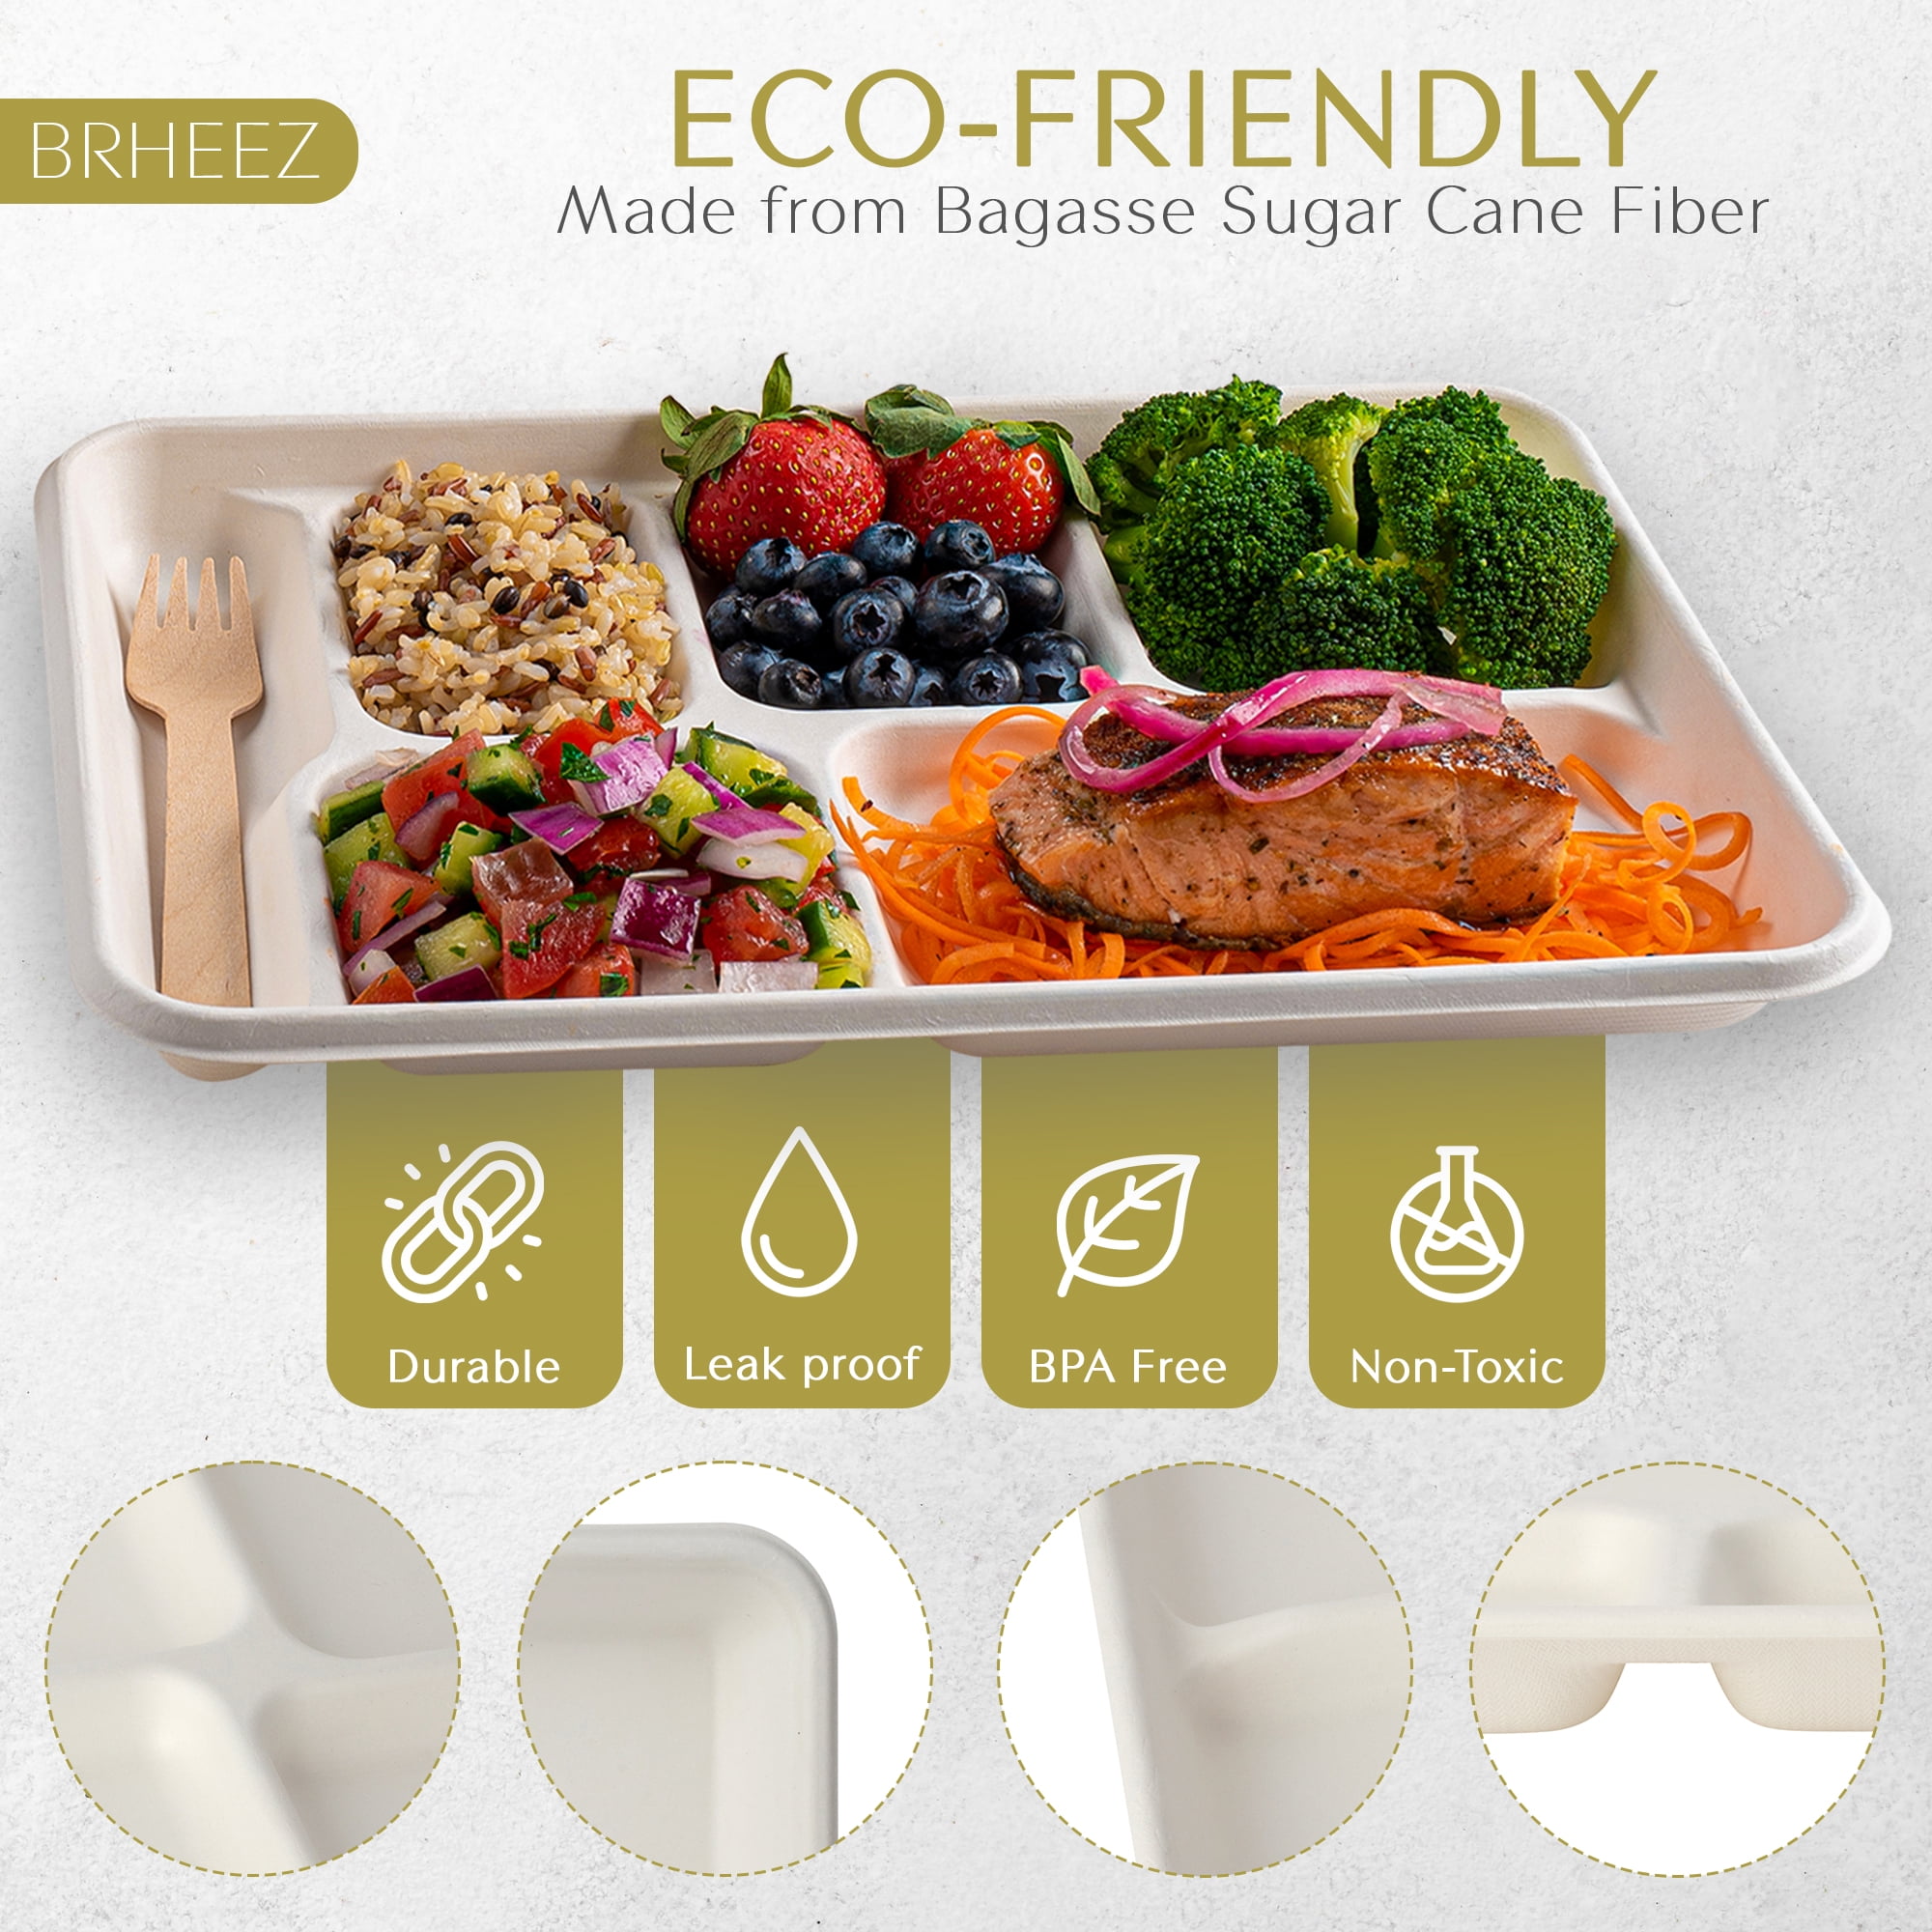 [50 Pack] 5-Compartment Sugarcane Fiber Disposable Tray - 100% Compostable American Tray, Serving Tray, Cafeteria Tray, Biodegradable, Eco Friendly